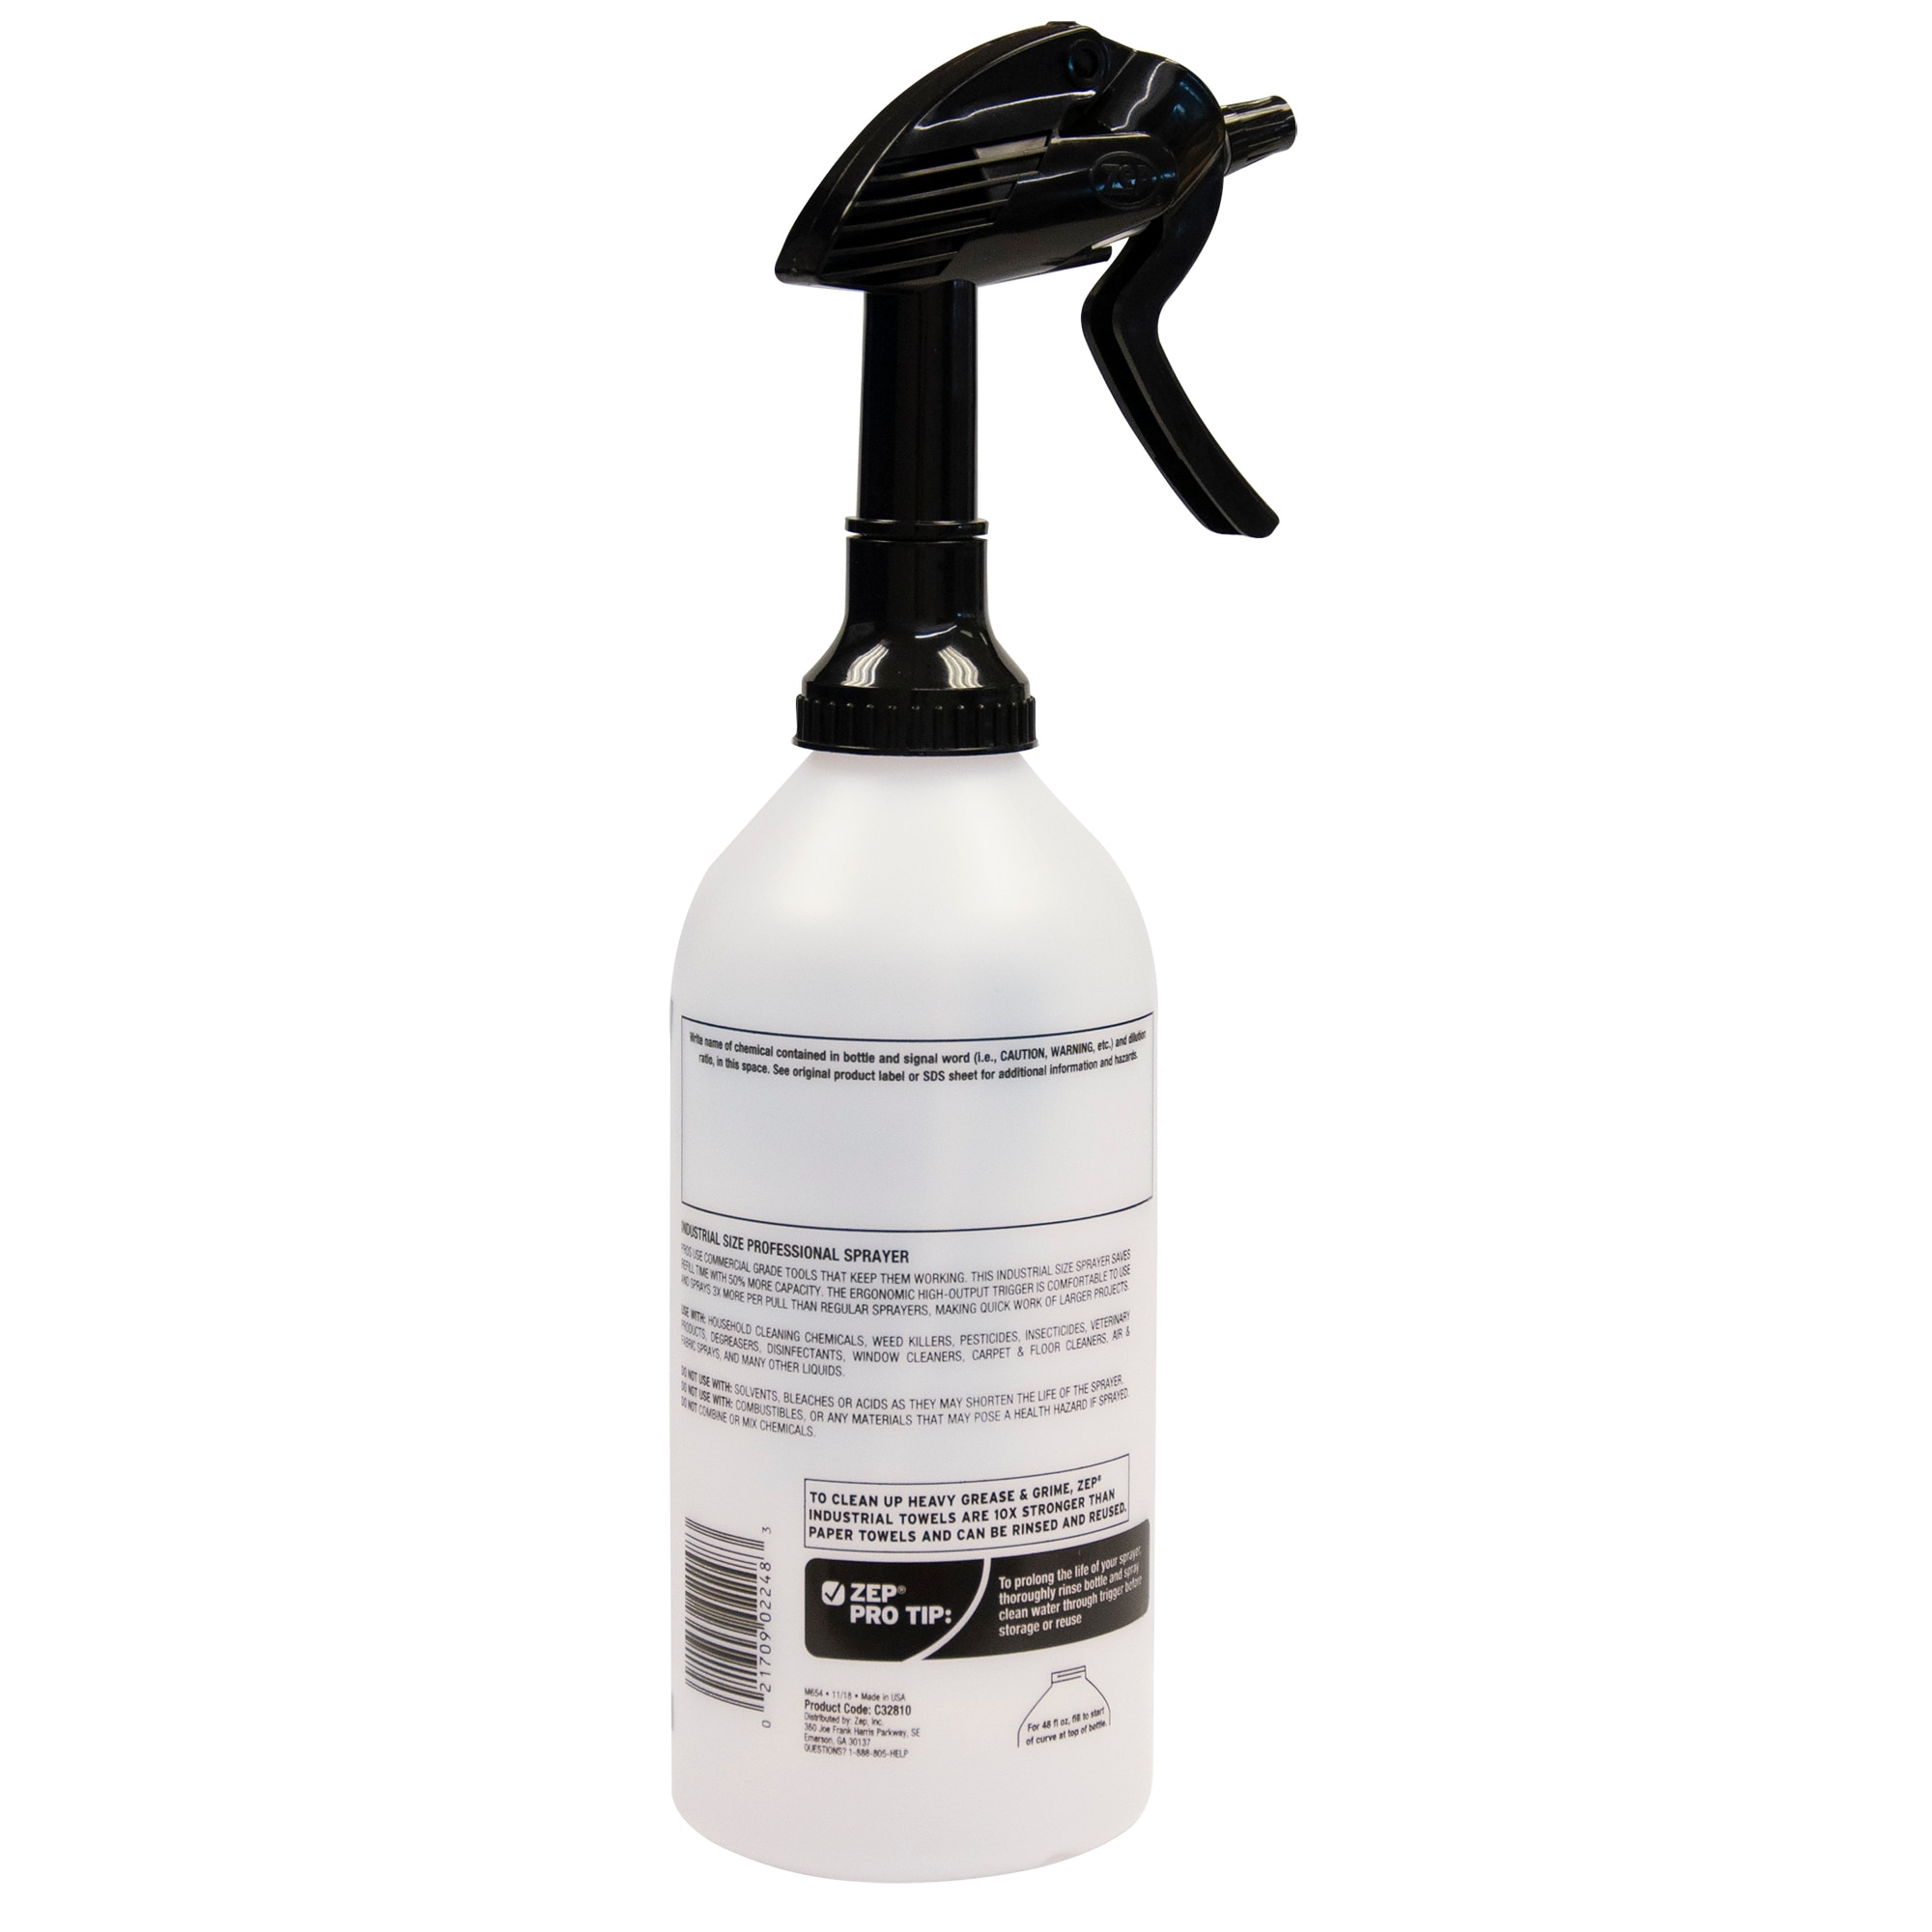 HARRIS Professional Spray Bottle 32oz, All-Purpose for Cleaning and Plants  with Clear Finish, Pressurized Sprayer, Adjustable Nozzle and Measurements